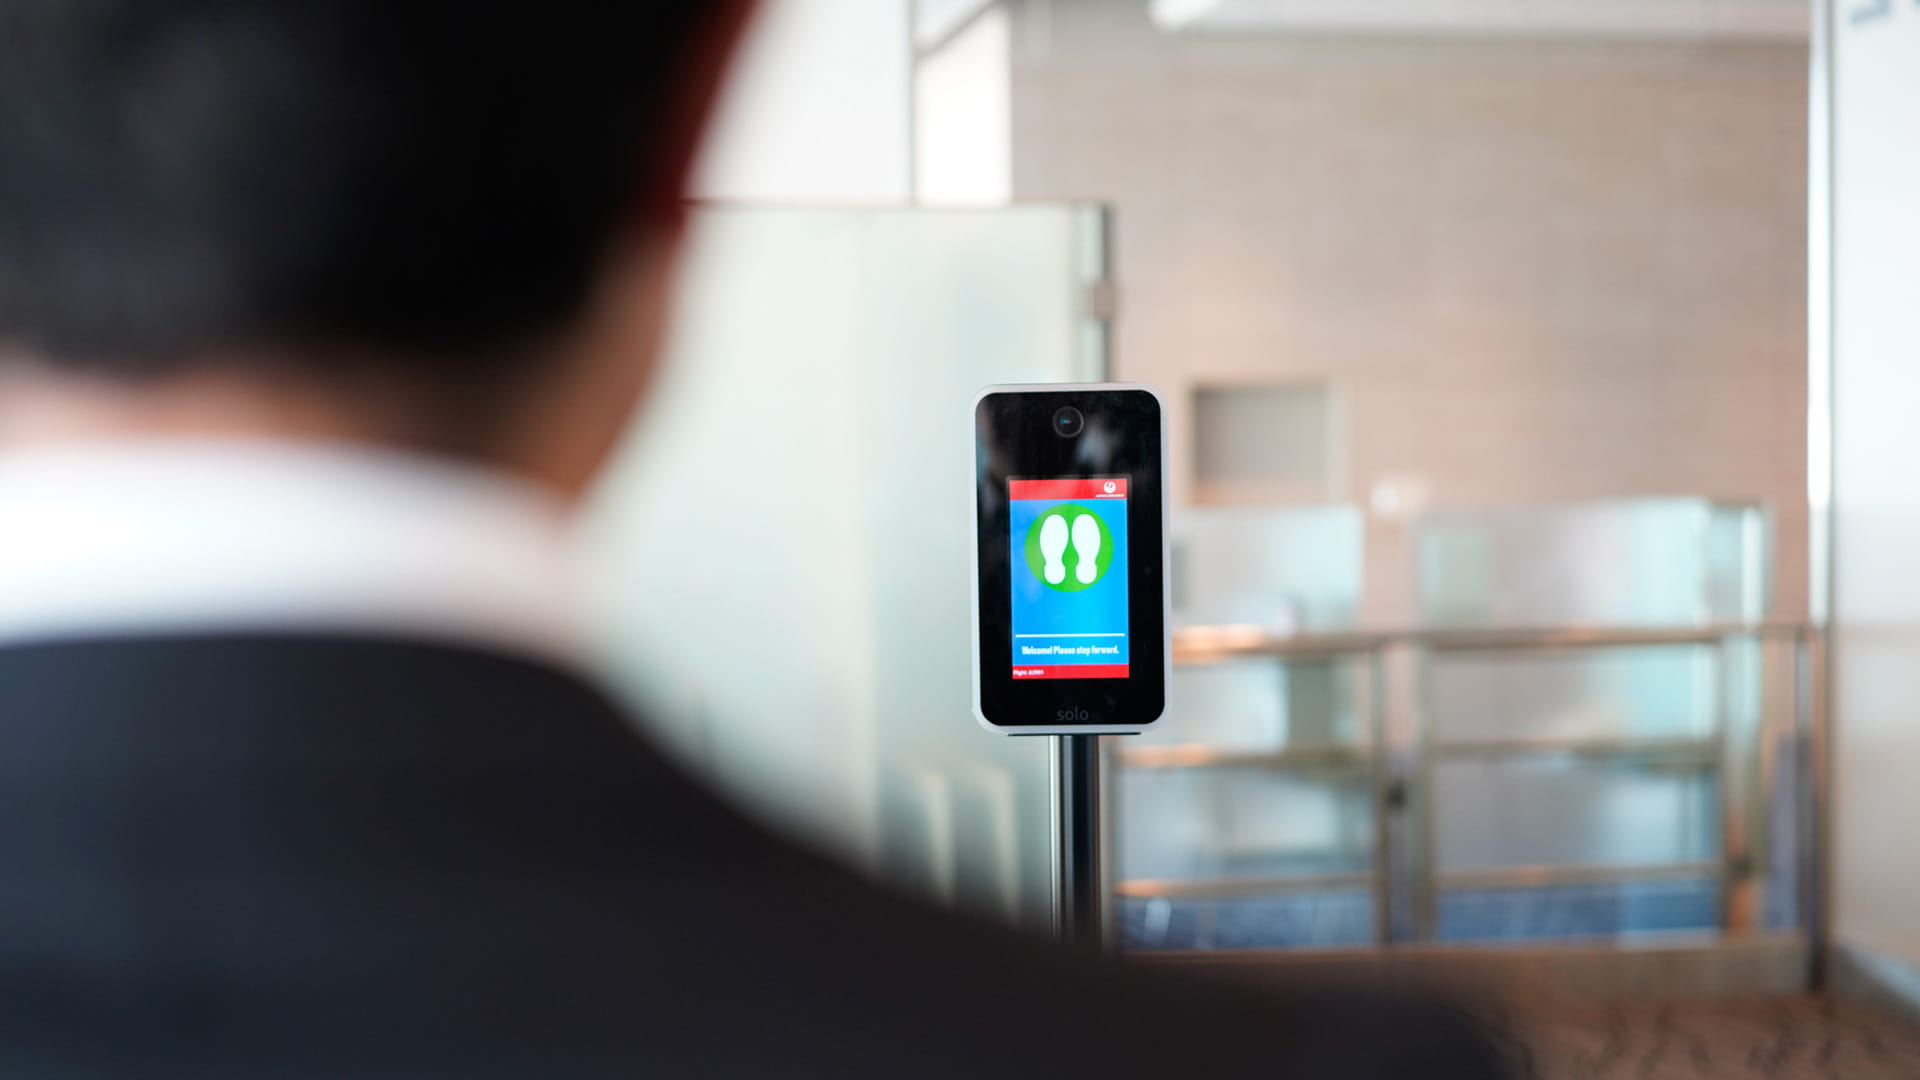 A person interacts with an airport biometrics device